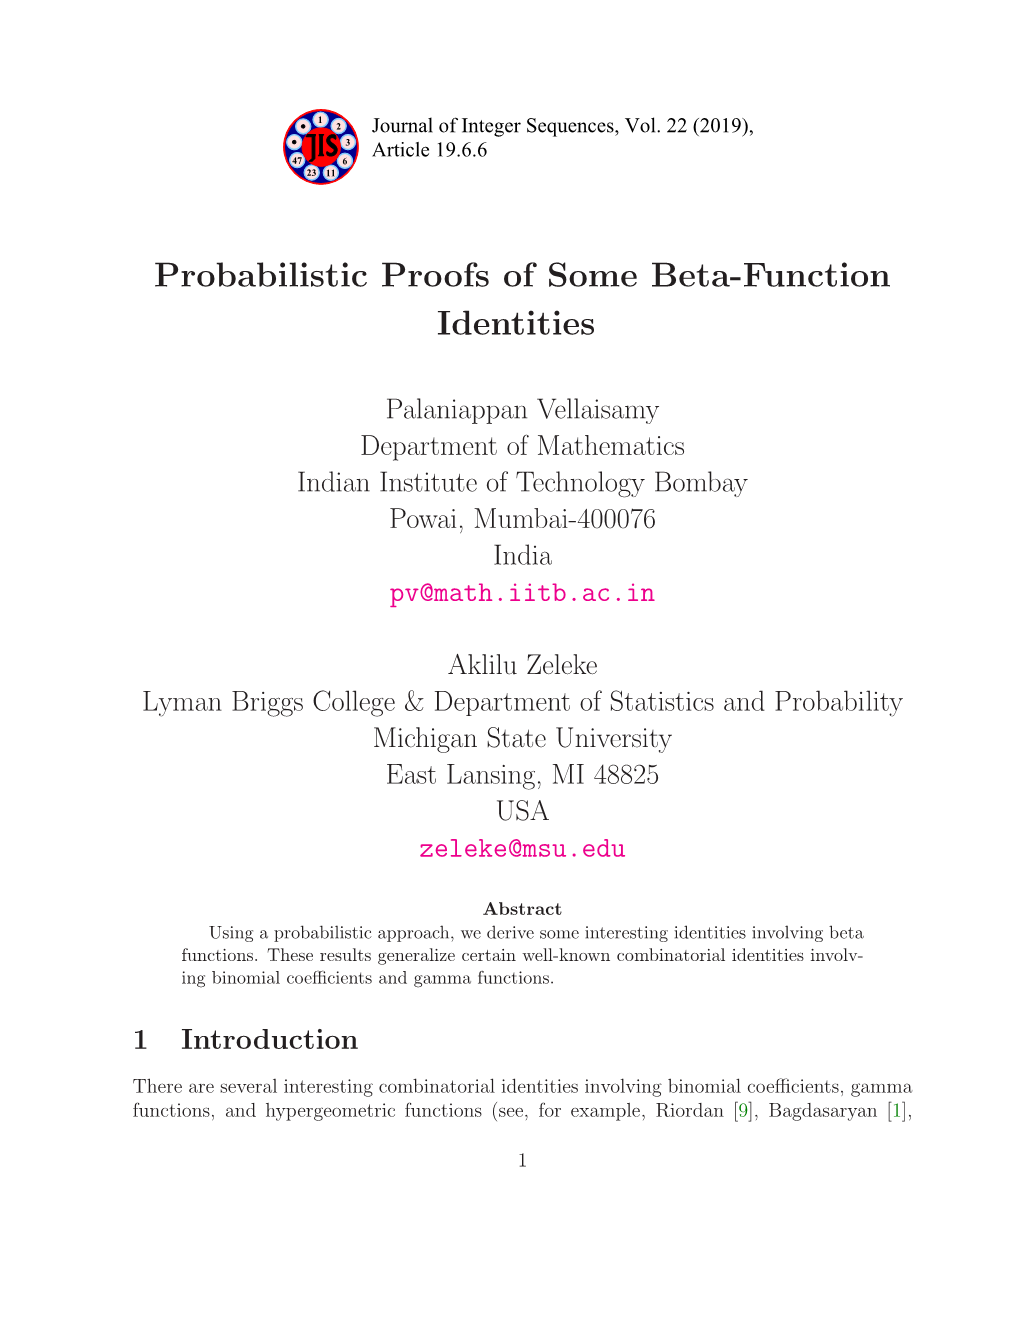 Probabilistic Proofs of Some Beta-Function Identities